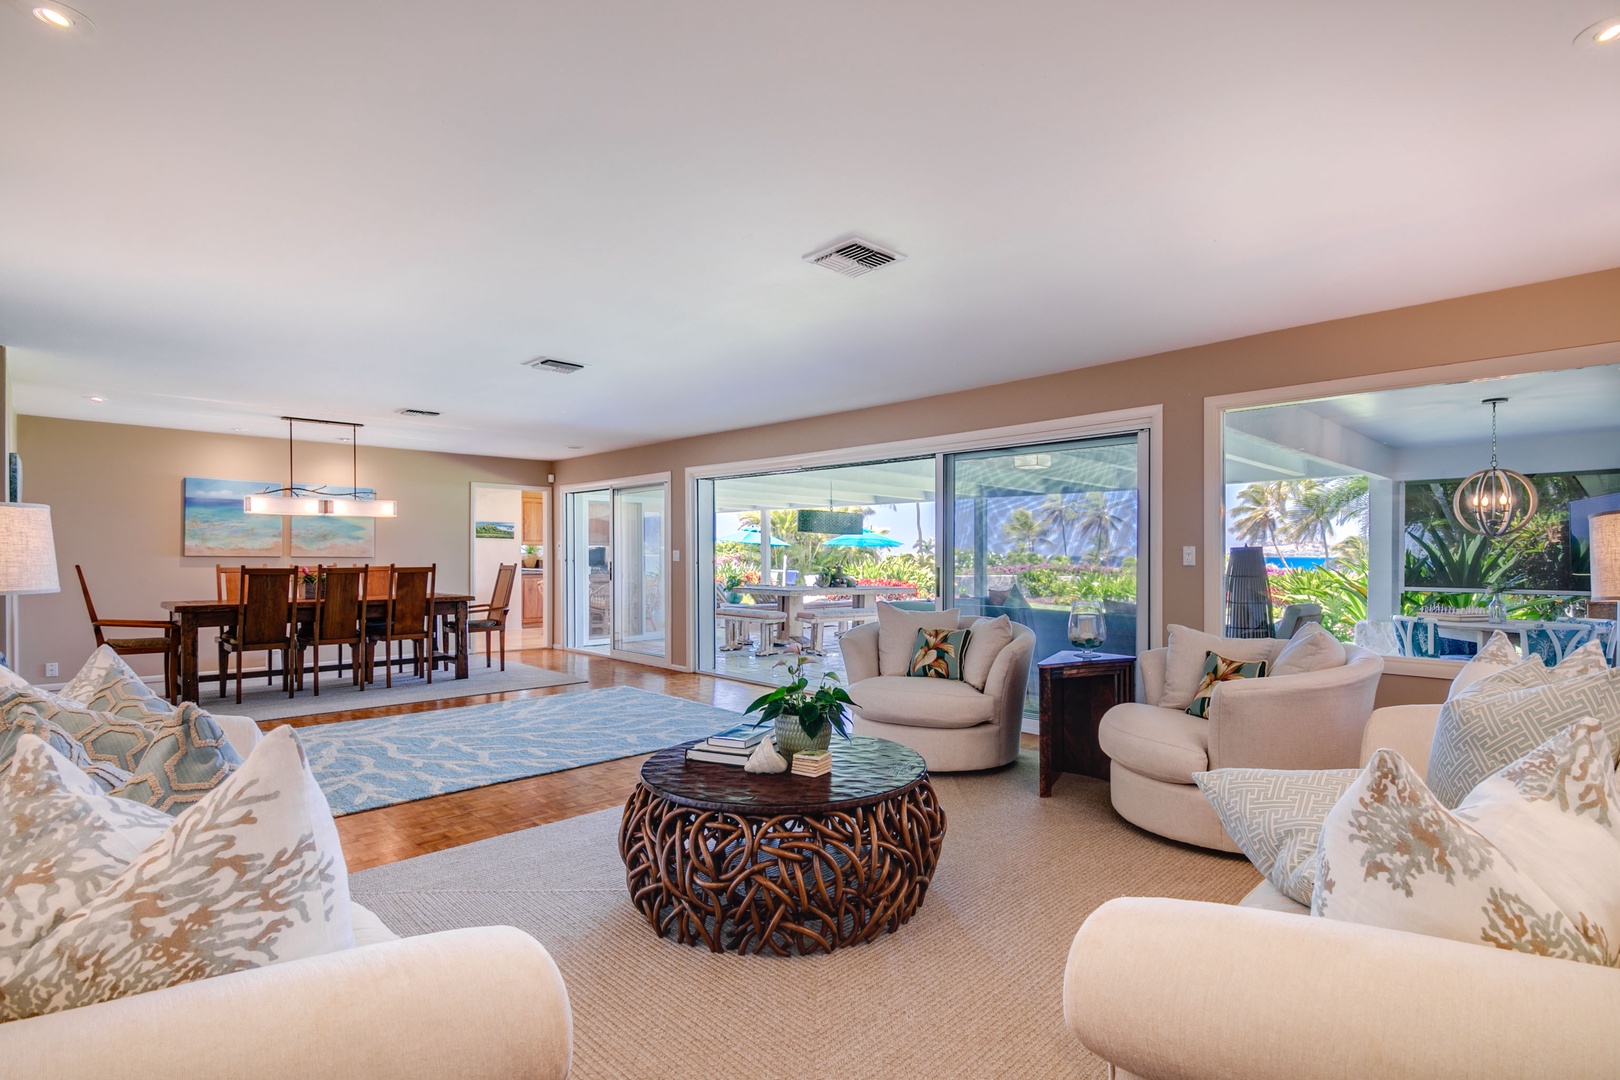 Honolulu Vacation Rentals, Hale Ola - The entrance leads to a spacious open-air retreat with sweeping ocean views, creating a serene ambiance for your relaxing vacation getaway